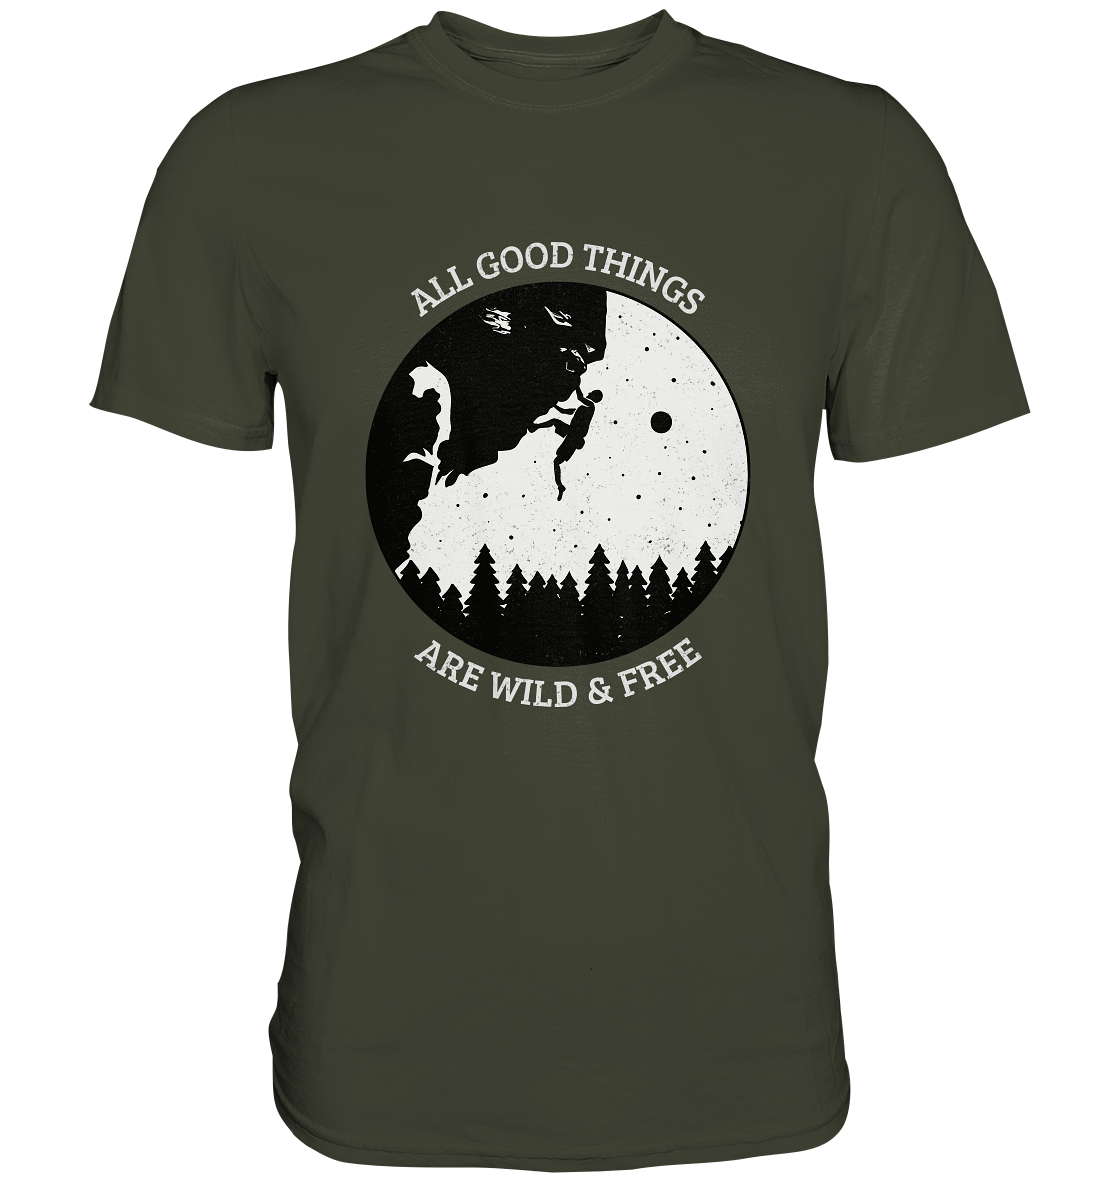 All good things are wild and free. Klettern Berge Outdoor - Premium Shirt